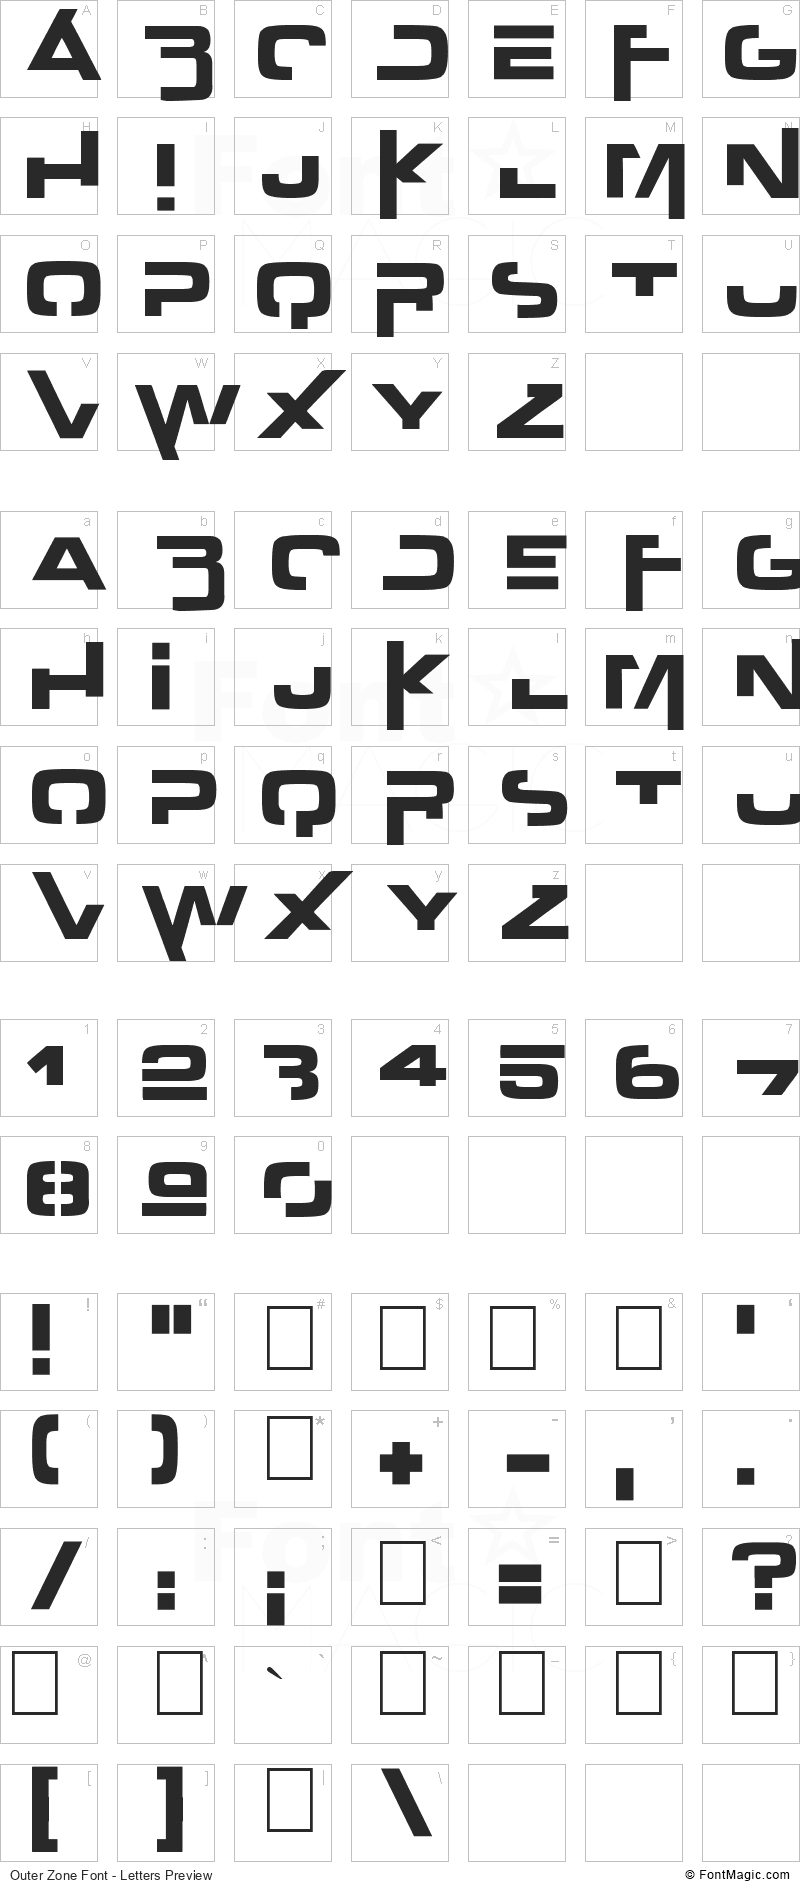 Outer Zone Font - All Latters Preview Chart